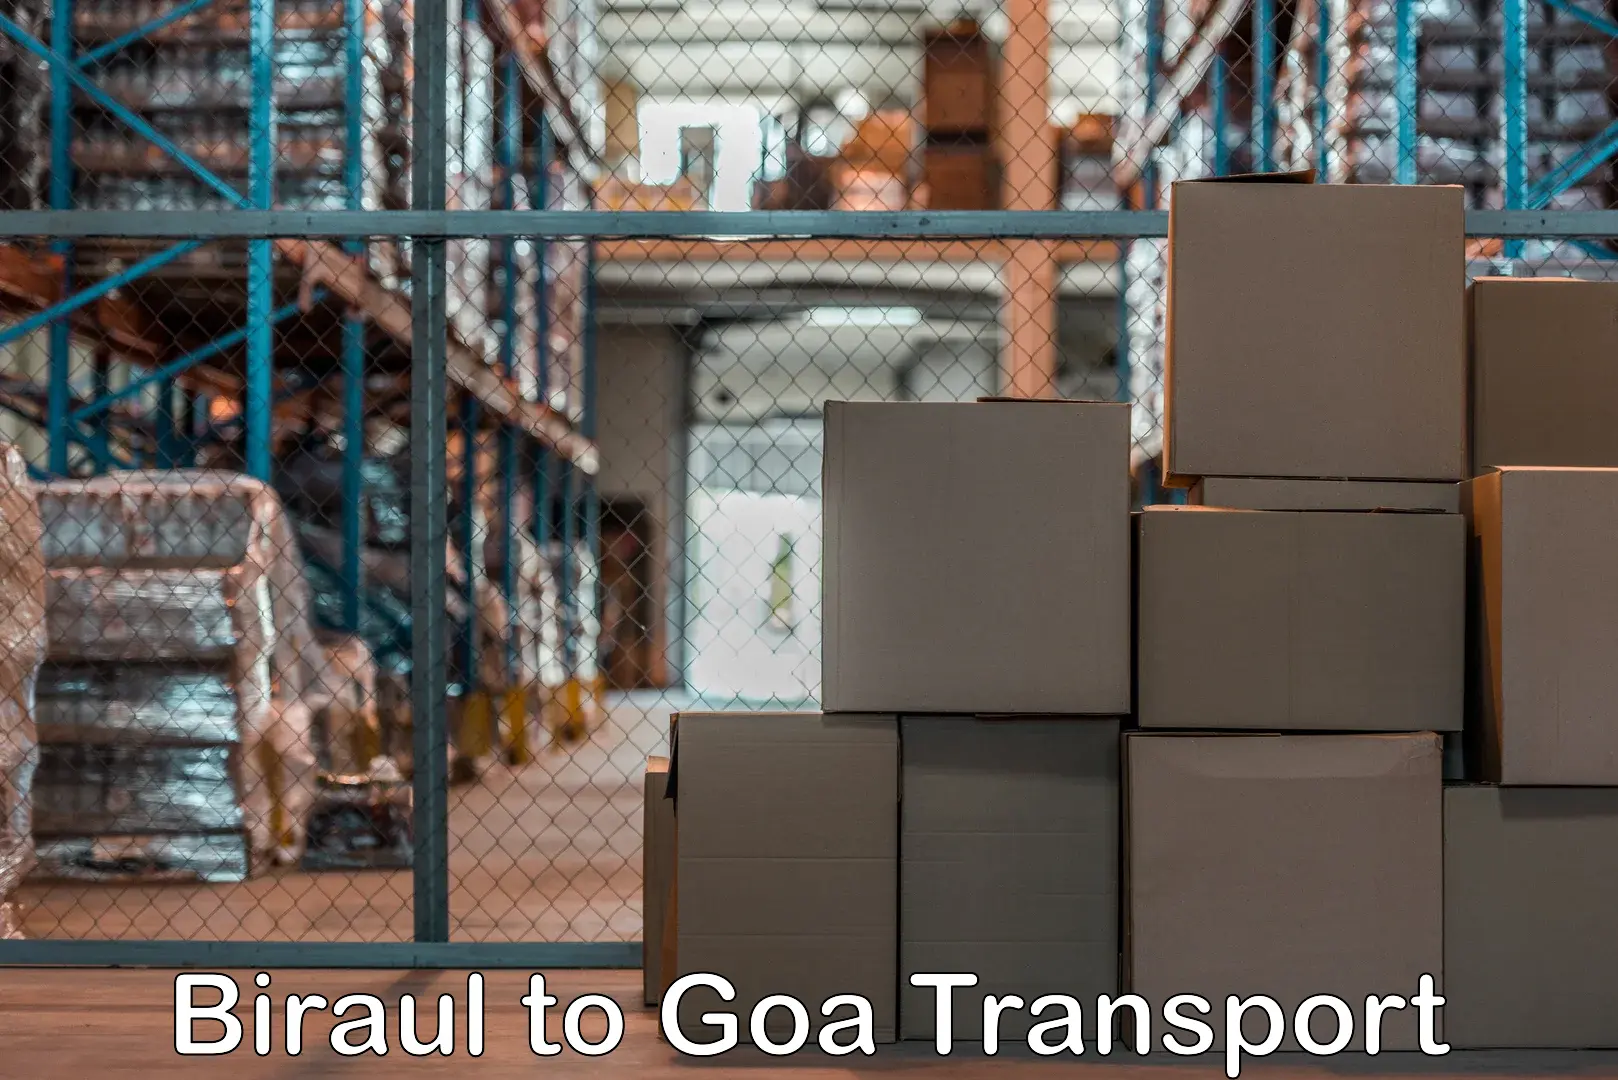 Transport in sharing in Biraul to South Goa